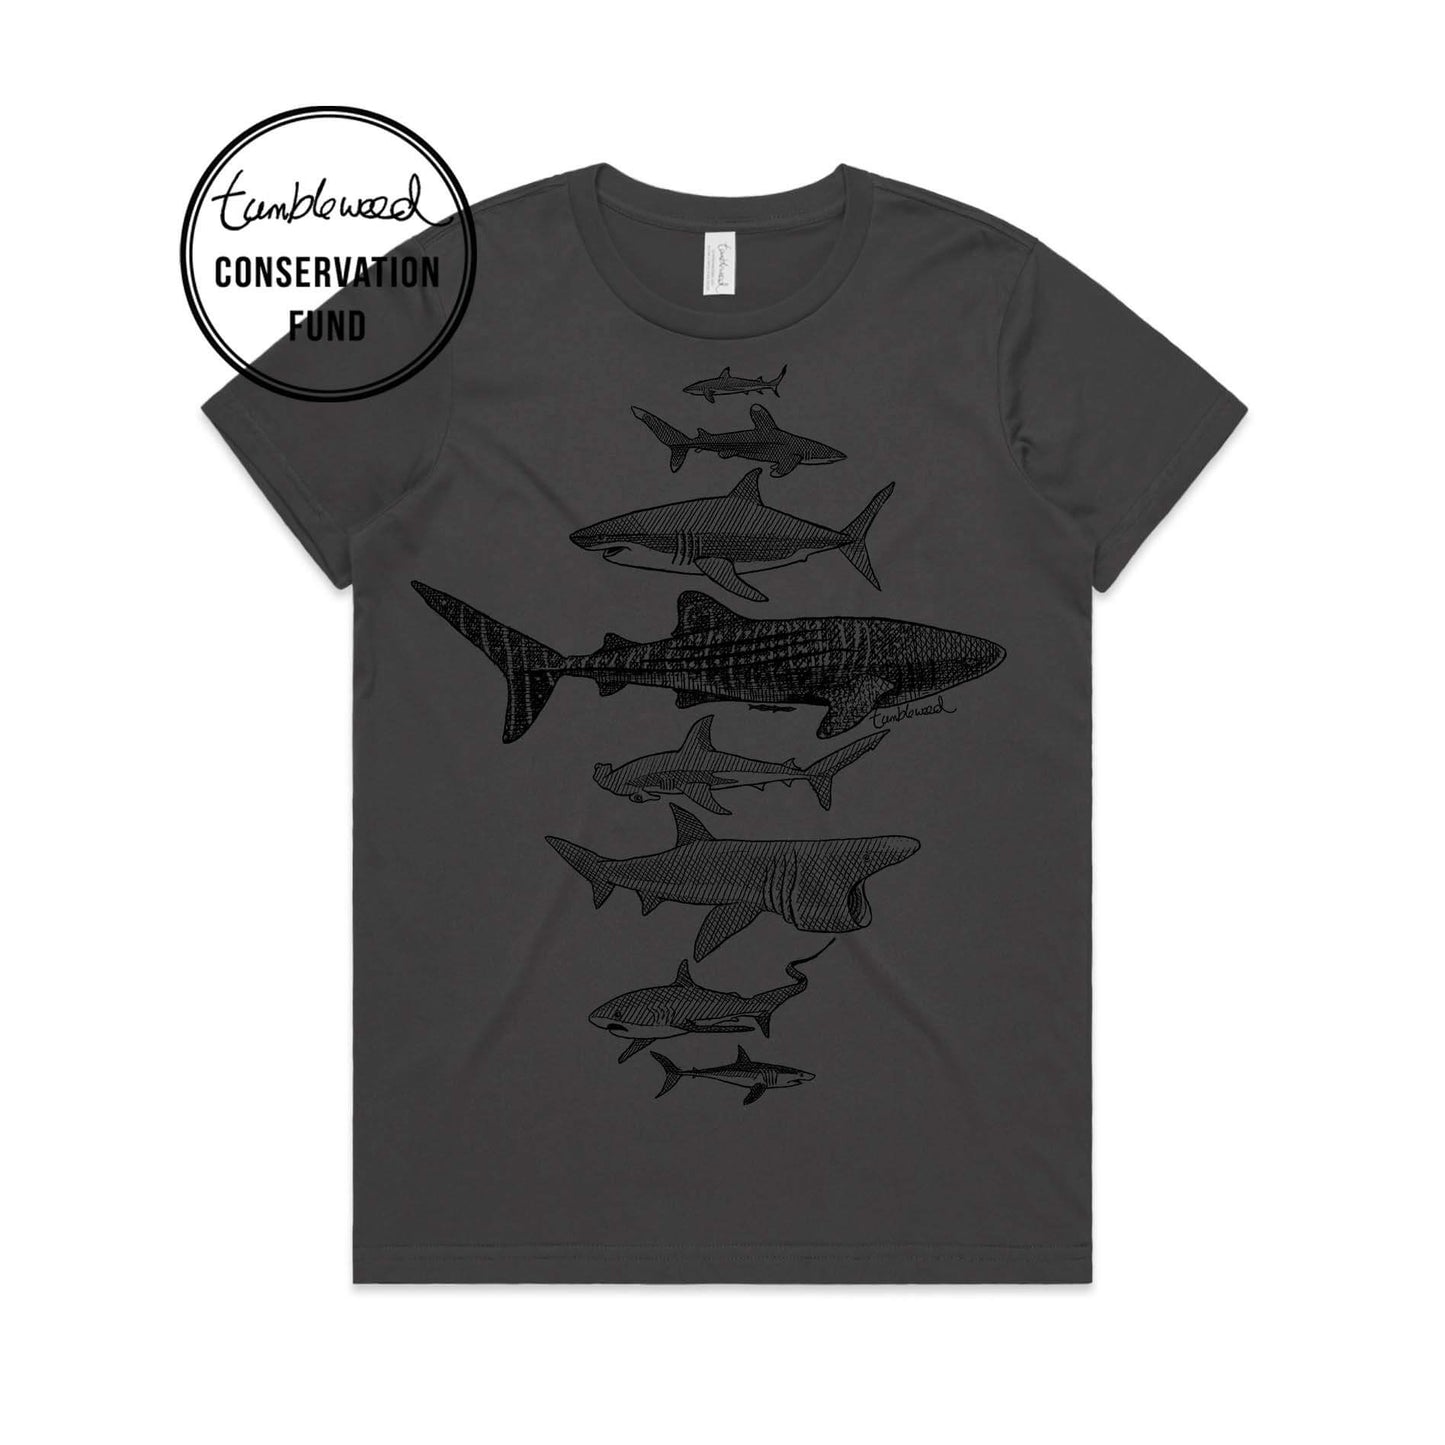 Charcoal, female t-shirt featuring a screen printed Sharks design.